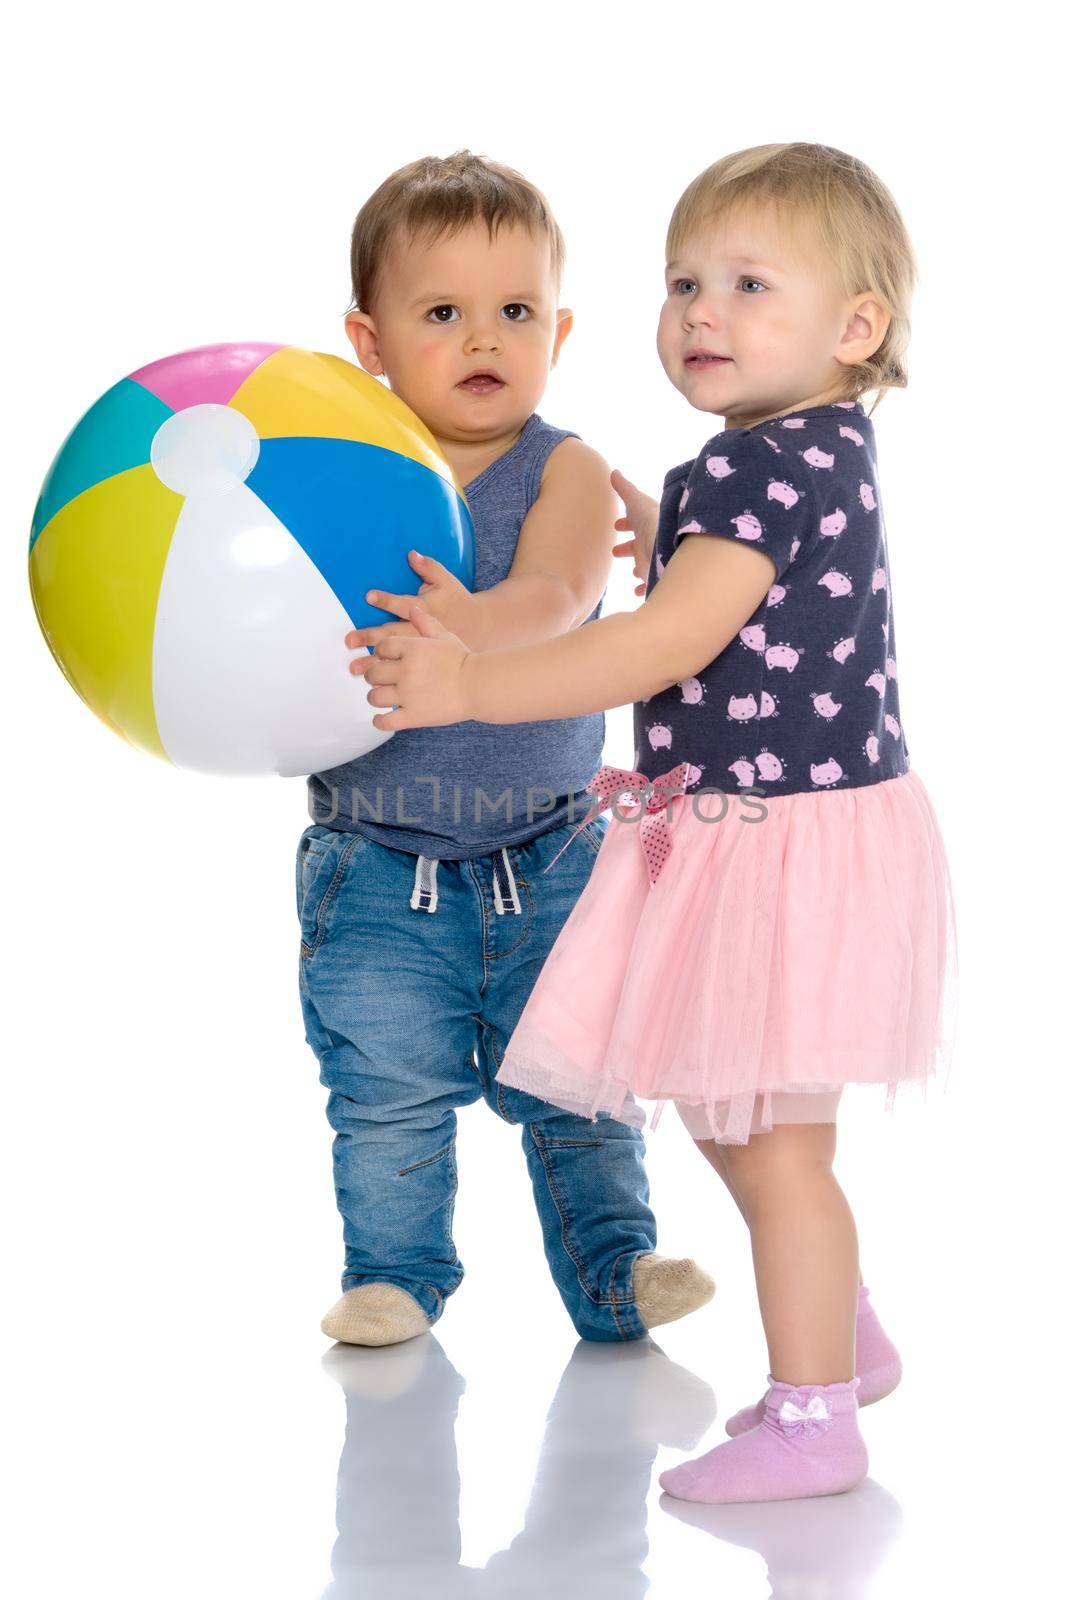 Toddler boy and girl playing with ball. The concept of a harmonious development of a child in the family, a happy childhood. Isolated on white background.